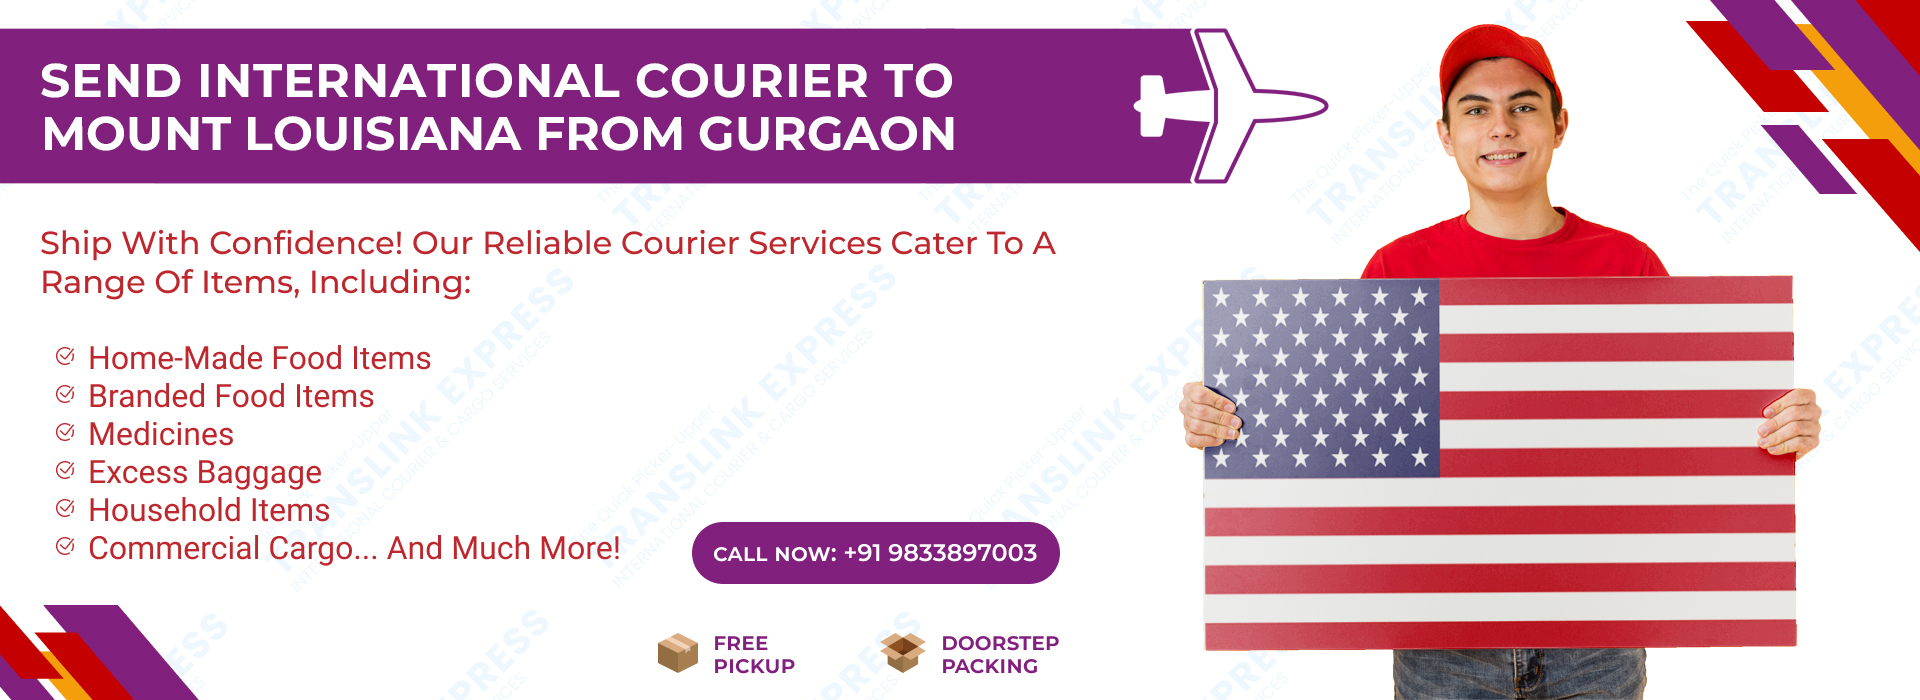 Courier to Mount Louisiana From Gurgaon